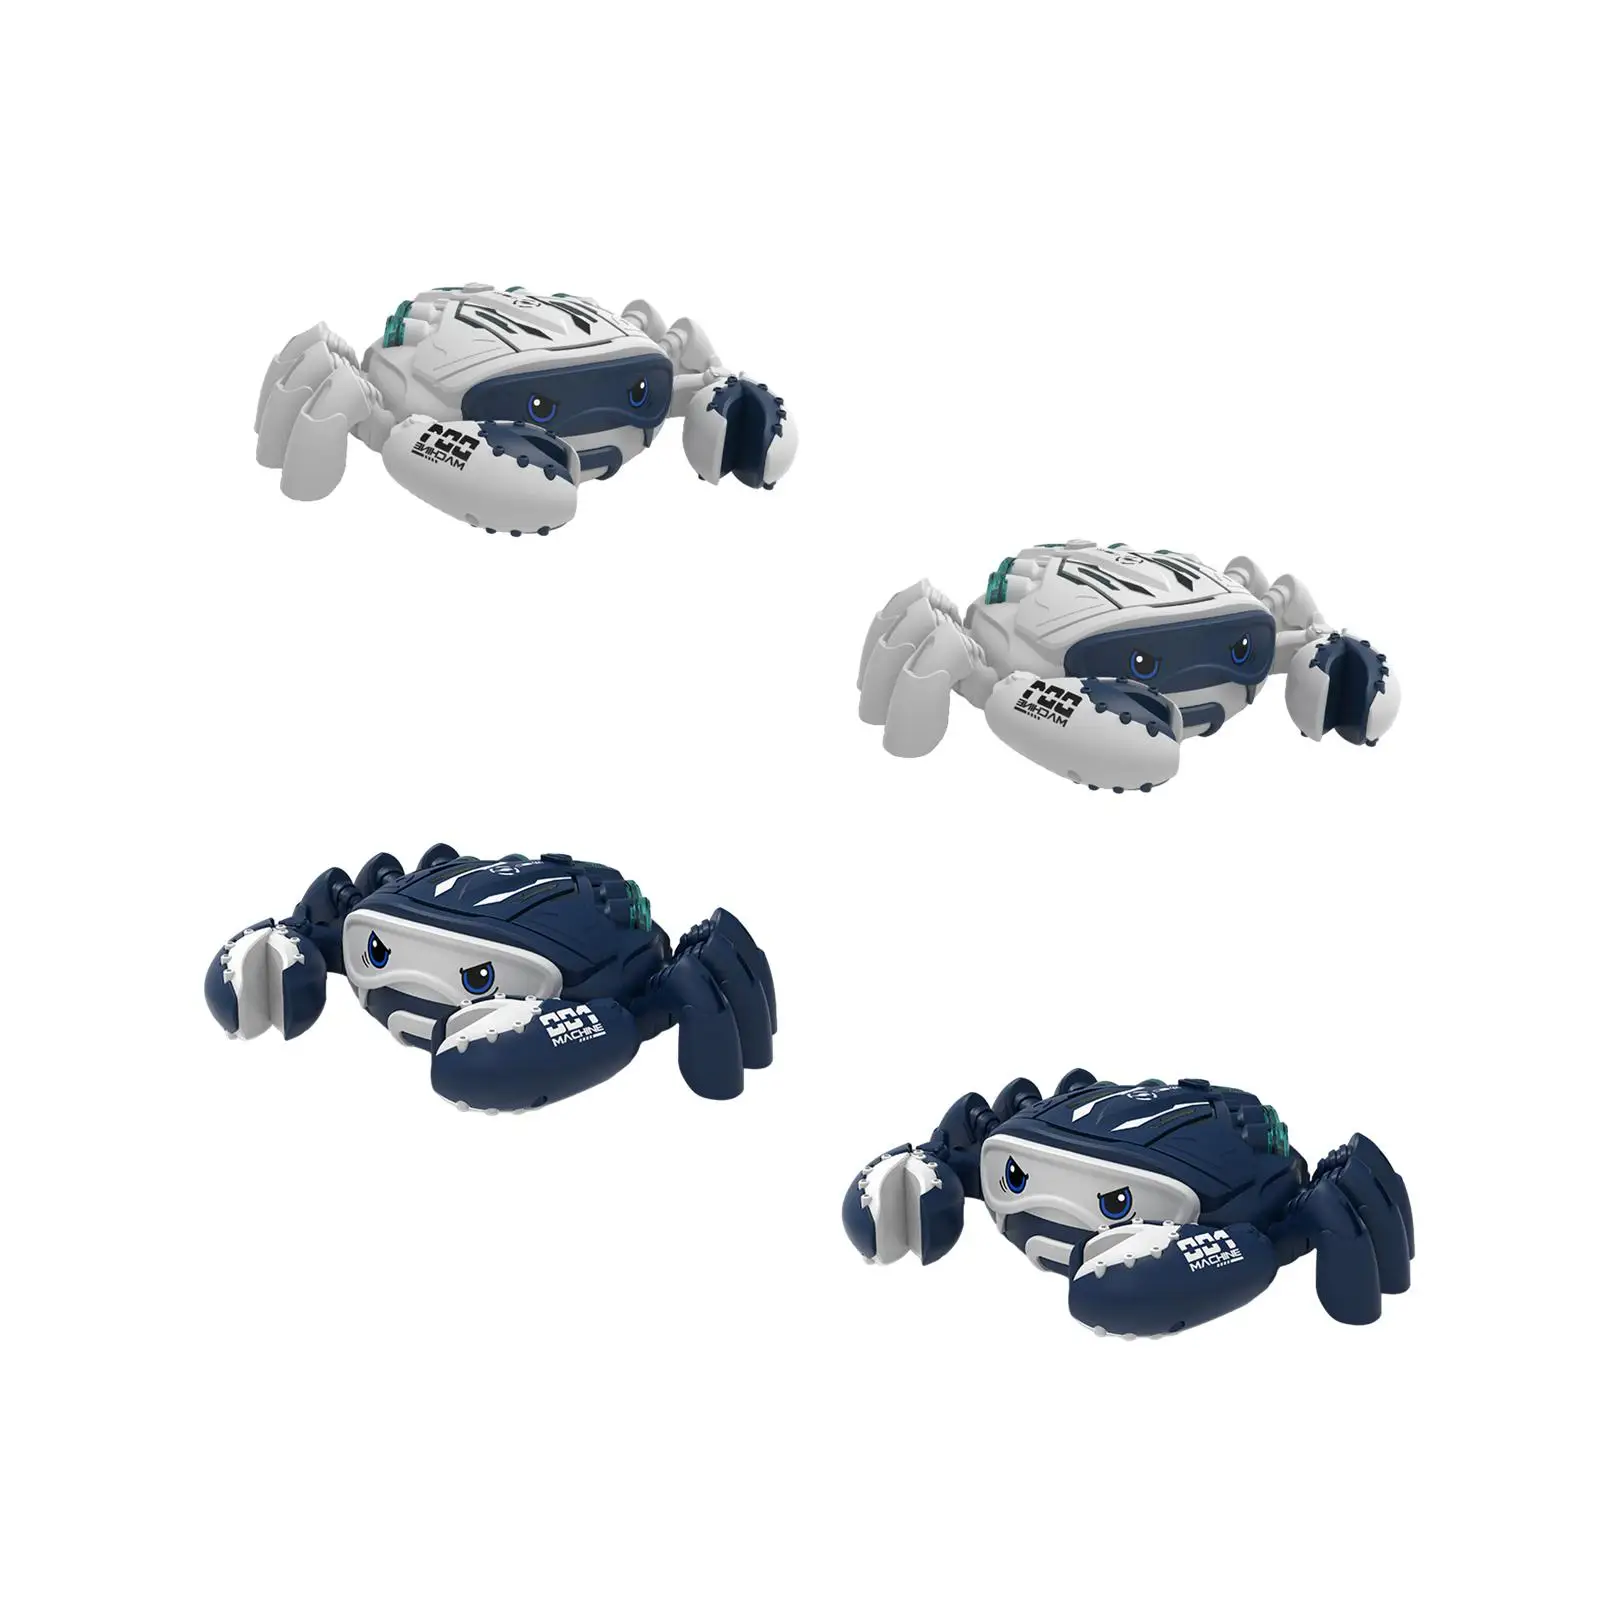 Crawling Toy Crabs Toys Interactive Electric Walking Toys Kids Toys Electric Crabs Toy Crawling Toys Babies Boy Girl Gifts